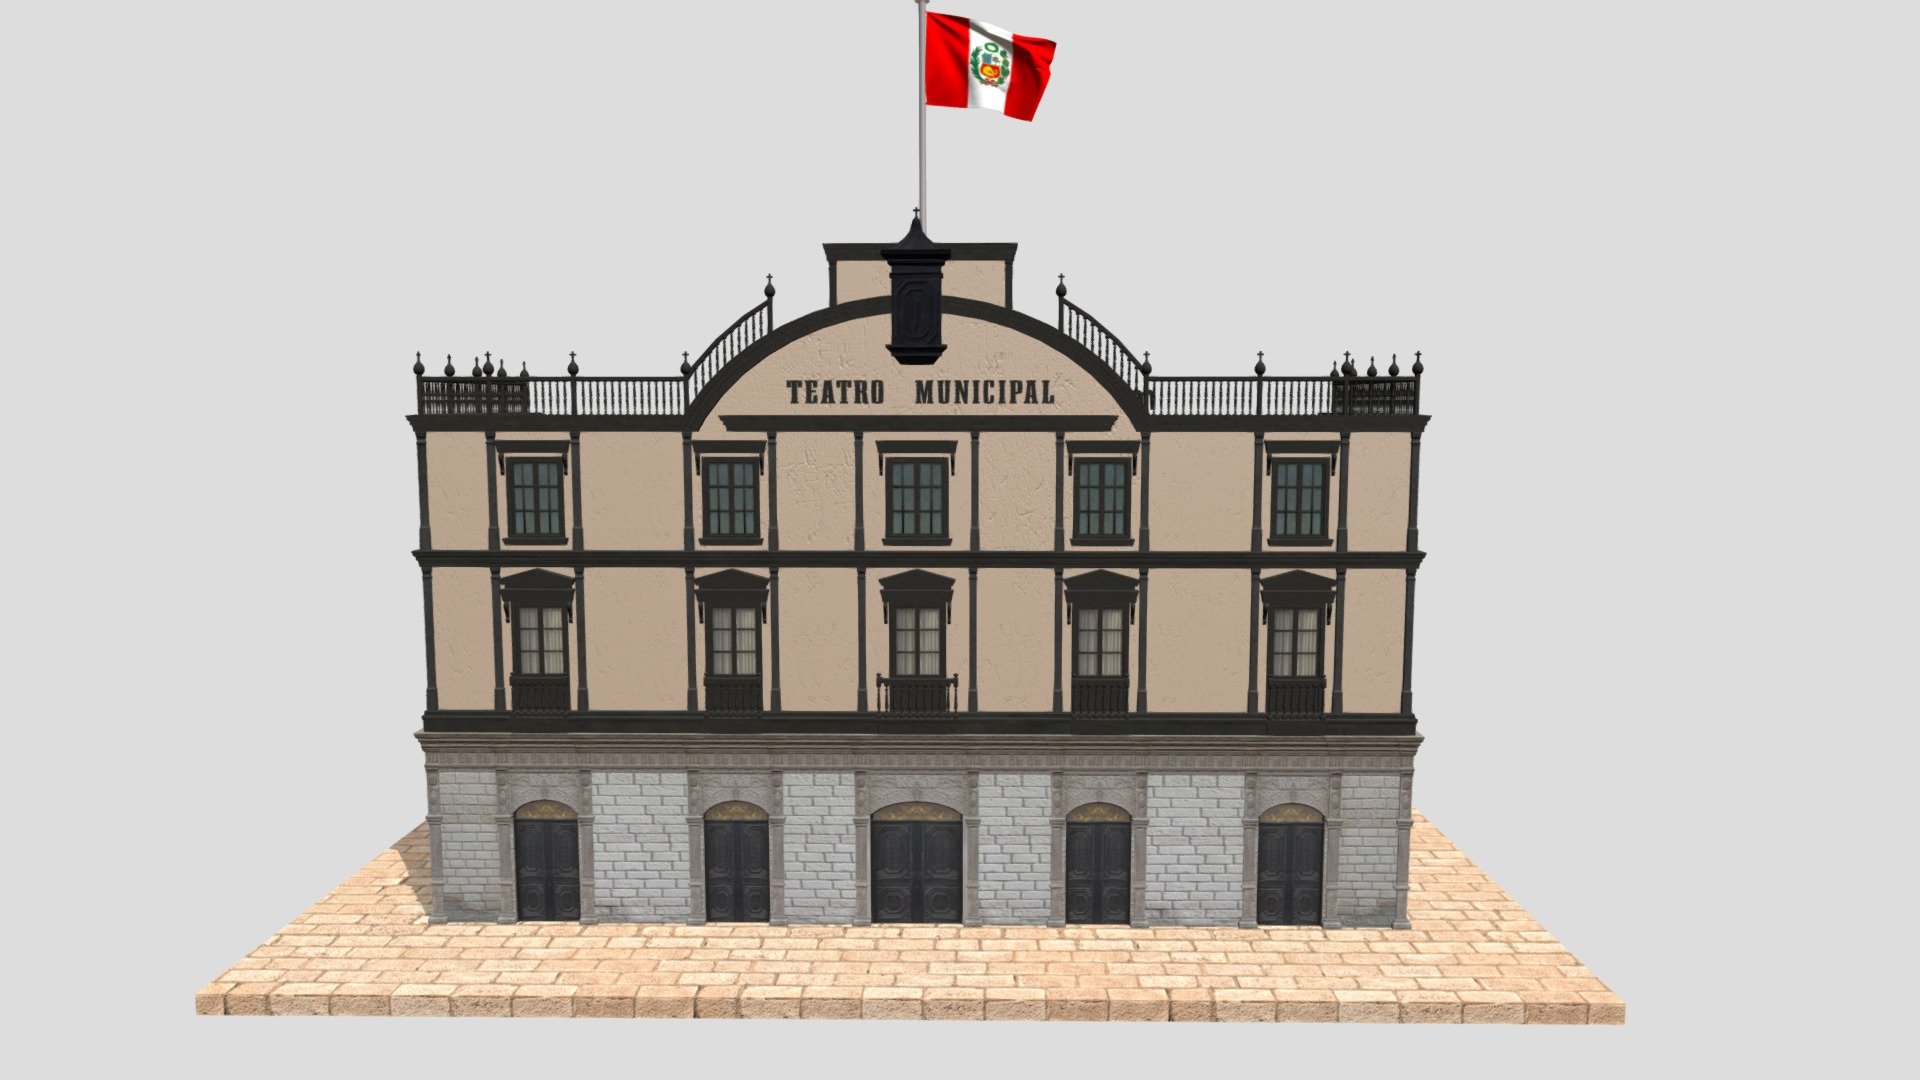 Teatro Municipal Tacna 3D

The Municipal Theater of Tacna or popularly known as &lsquo;Theater of Tacna', is a theater located in the center of Tacna, Peru. It is located in front of the MacLean Square and at the moment this theater is being administered by the Provincial Municipality of Tacna.





Made to scale approximately




by: Jhony David 



email: misteriotktk@gmail.com
 - TEATRO TACNA 3D // Blender - 3D model by MISTERIO (@misteriotk) 3d model